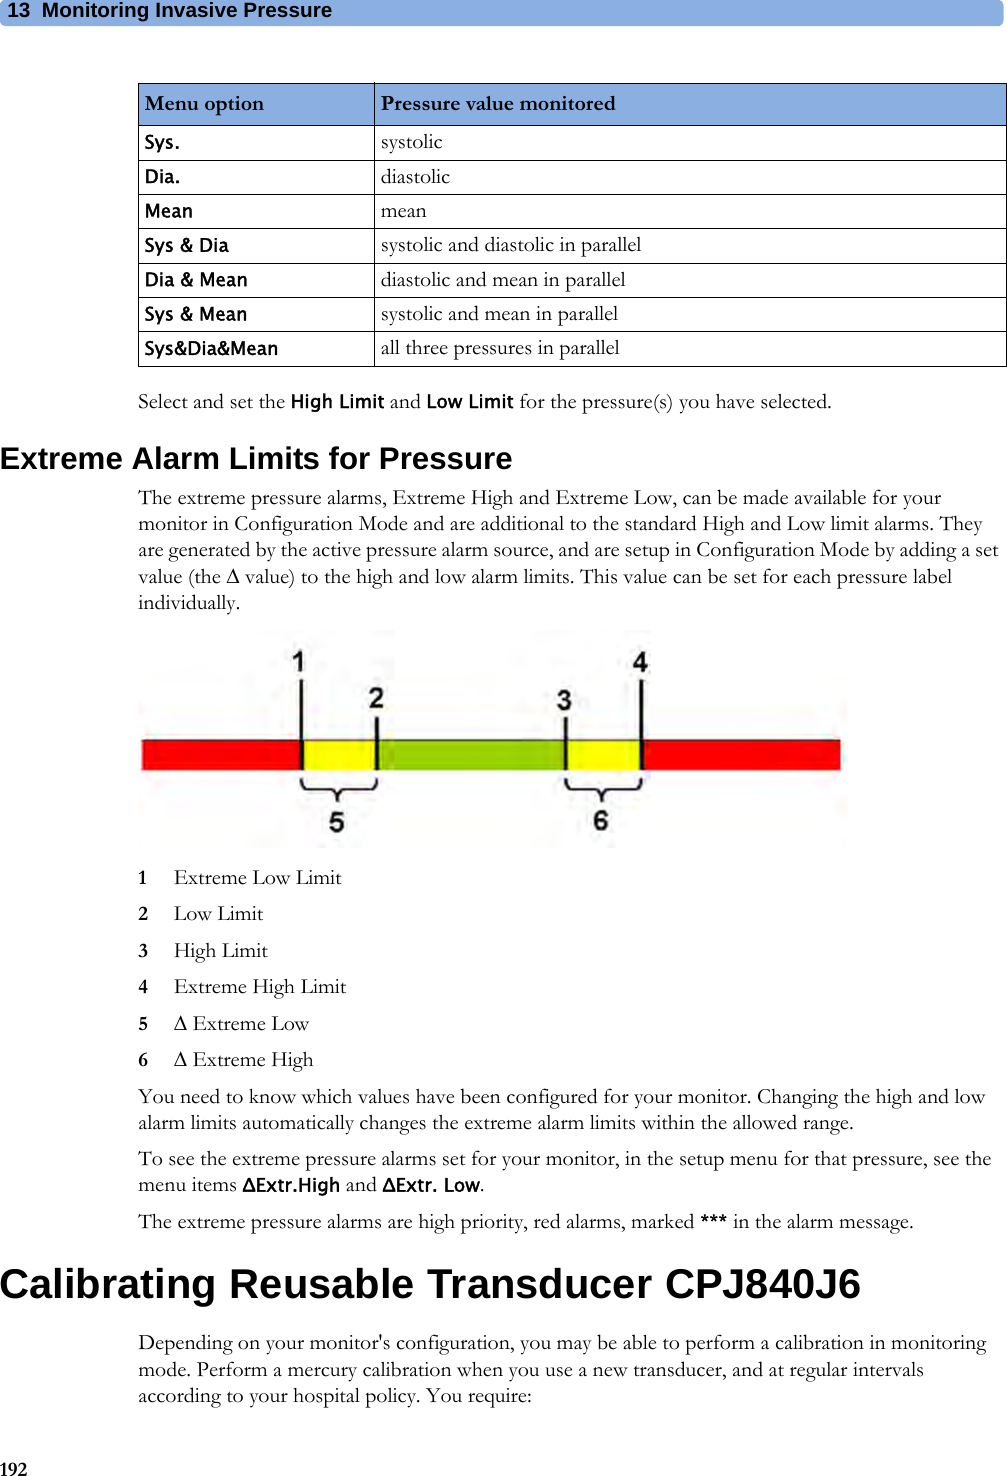 13 Monitoring Invasive Pressure192Select and set the High Limit and Low Limit for the pressure(s) you have selected.Extreme Alarm Limits for PressureThe extreme pressure alarms, Extreme High and Extreme Low, can be made available for your monitor in Configuration Mode and are additional to the standard High and Low limit alarms. They are generated by the active pressure alarm source, and are setup in Configuration Mode by adding a set value (the  value) to the high and low alarm limits. This value can be set for each pressure label individually.1Extreme Low Limit2Low Limit3High Limit4Extreme High Limit5 Extreme Low6 Extreme HighYou need to know which values have been configured for your monitor. Changing the high and low alarm limits automatically changes the extreme alarm limits within the allowed range.To see the extreme pressure alarms set for your monitor, in the setup menu for that pressure, see the menu items ΔExtr.High and ΔExtr. Low. The extreme pressure alarms are high priority, red alarms, marked *** in the alarm message.Calibrating Reusable Transducer CPJ840J6Depending on your monitor&apos;s configuration, you may be able to perform a calibration in monitoring mode. Perform a mercury calibration when you use a new transducer, and at regular intervals according to your hospital policy. You require:Menu option Pressure value monitoredSys. systolicDia. diastolicMean meanSys &amp; Dia systolic and diastolic in parallelDia &amp; Mean diastolic and mean in parallelSys &amp; Mean systolic and mean in parallelSys&amp;Dia&amp;Mean all three pressures in parallel